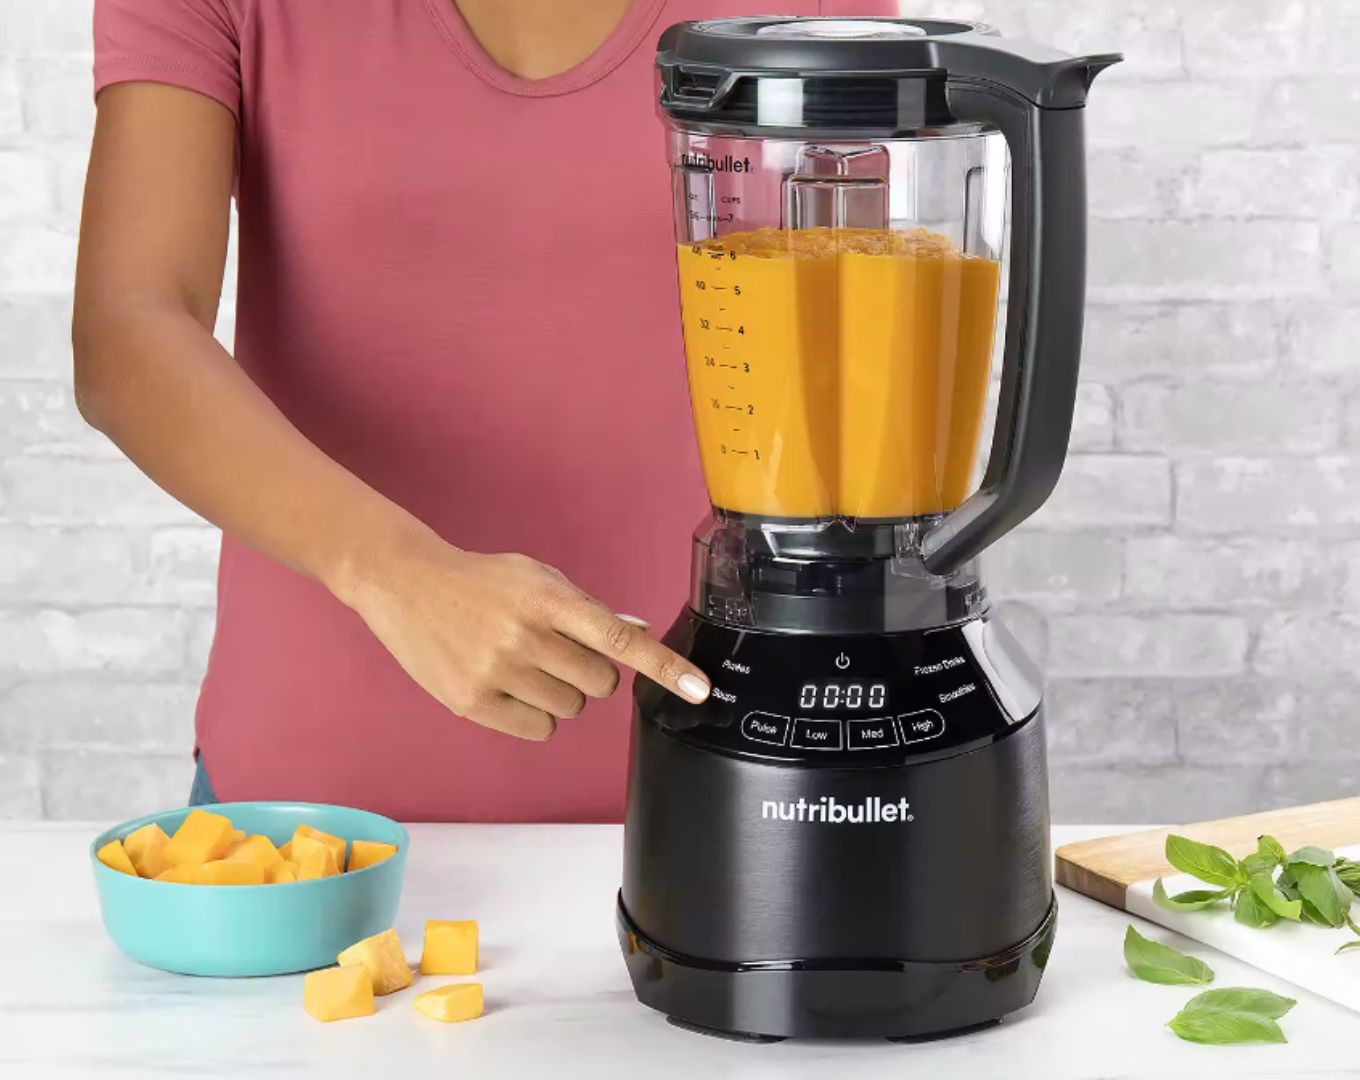 HONEST REVIEW NUTRIBULLET BABY, PRODUCT REVIEW